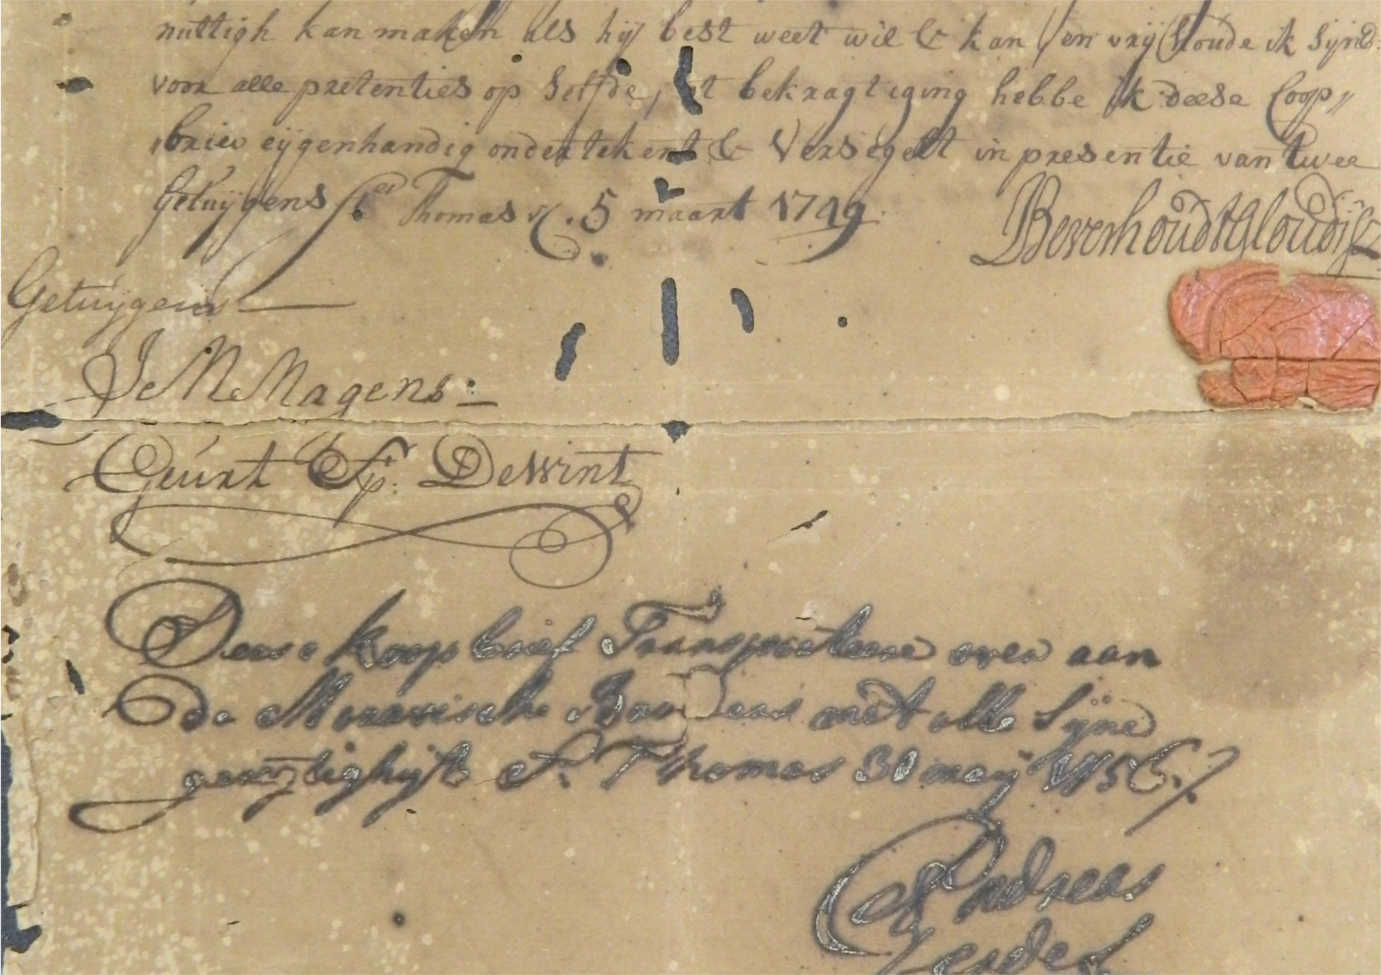 NEH funding helps the Moravian Archives preserve historically-significant documents, many of which are too delicate to handle. Image courtesy of the Moravian Archives.